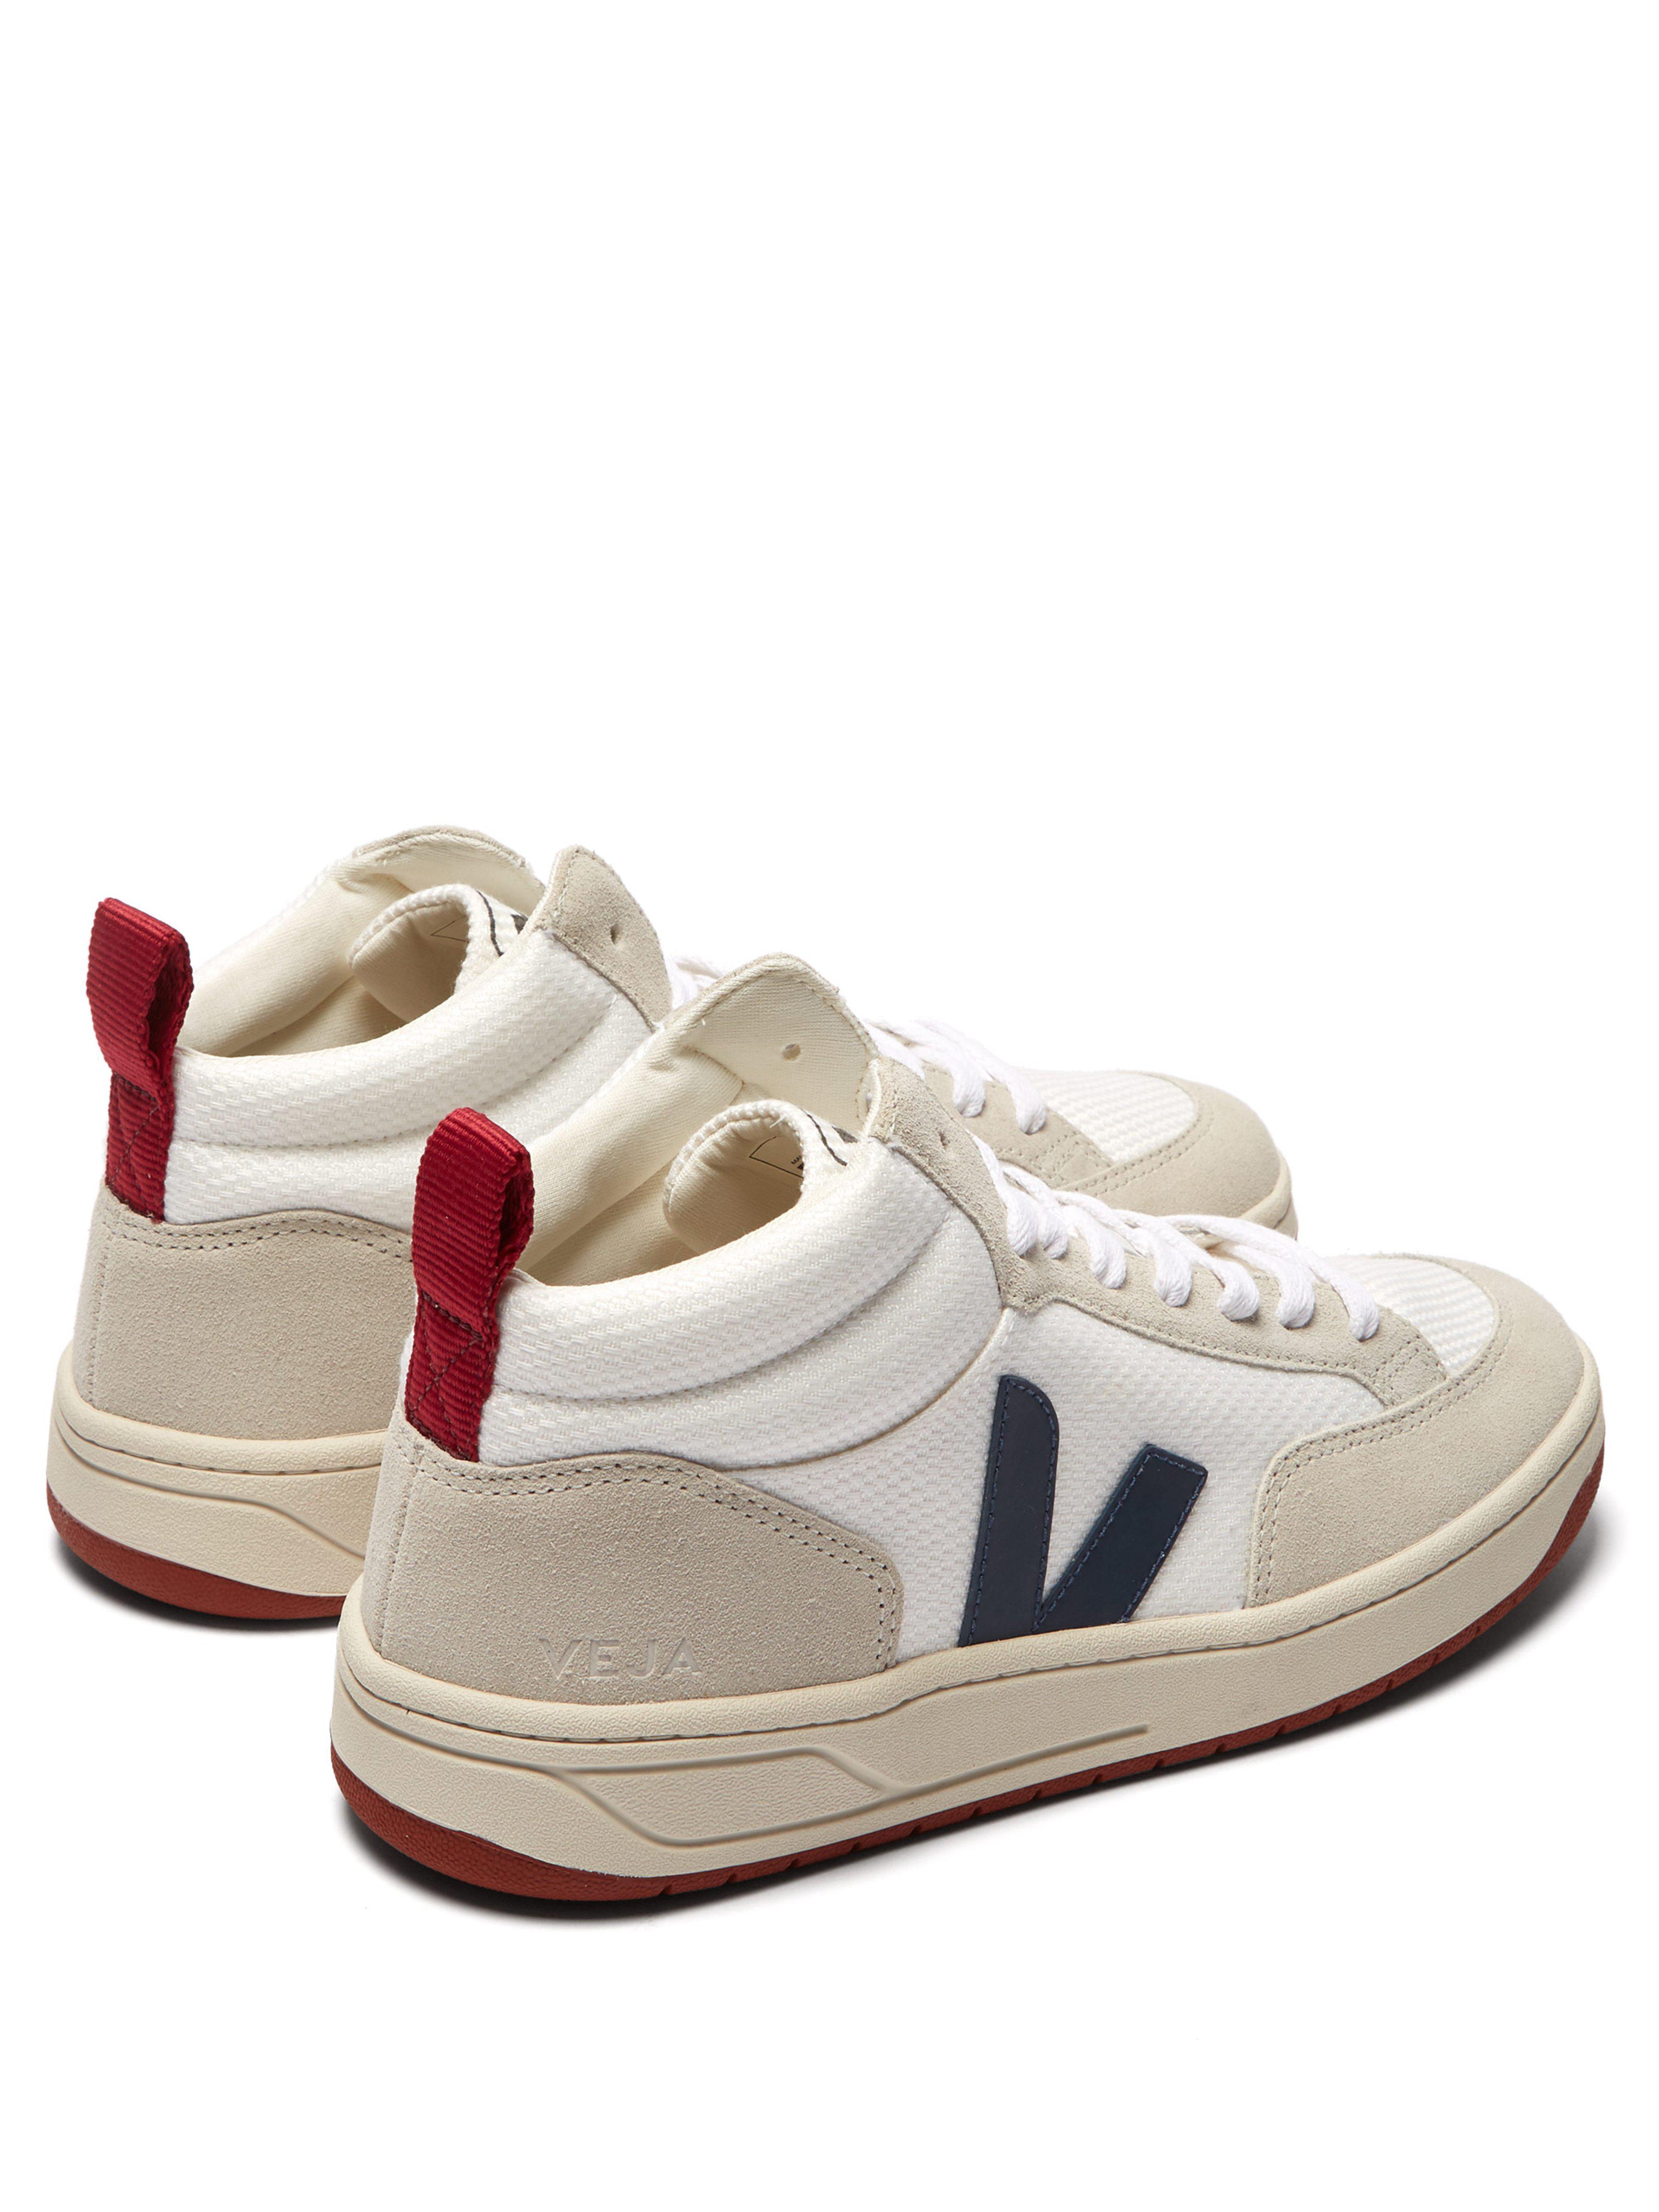 Veja Suede Roraima High Top B Mesh Trainers in White Navy (White) - Lyst